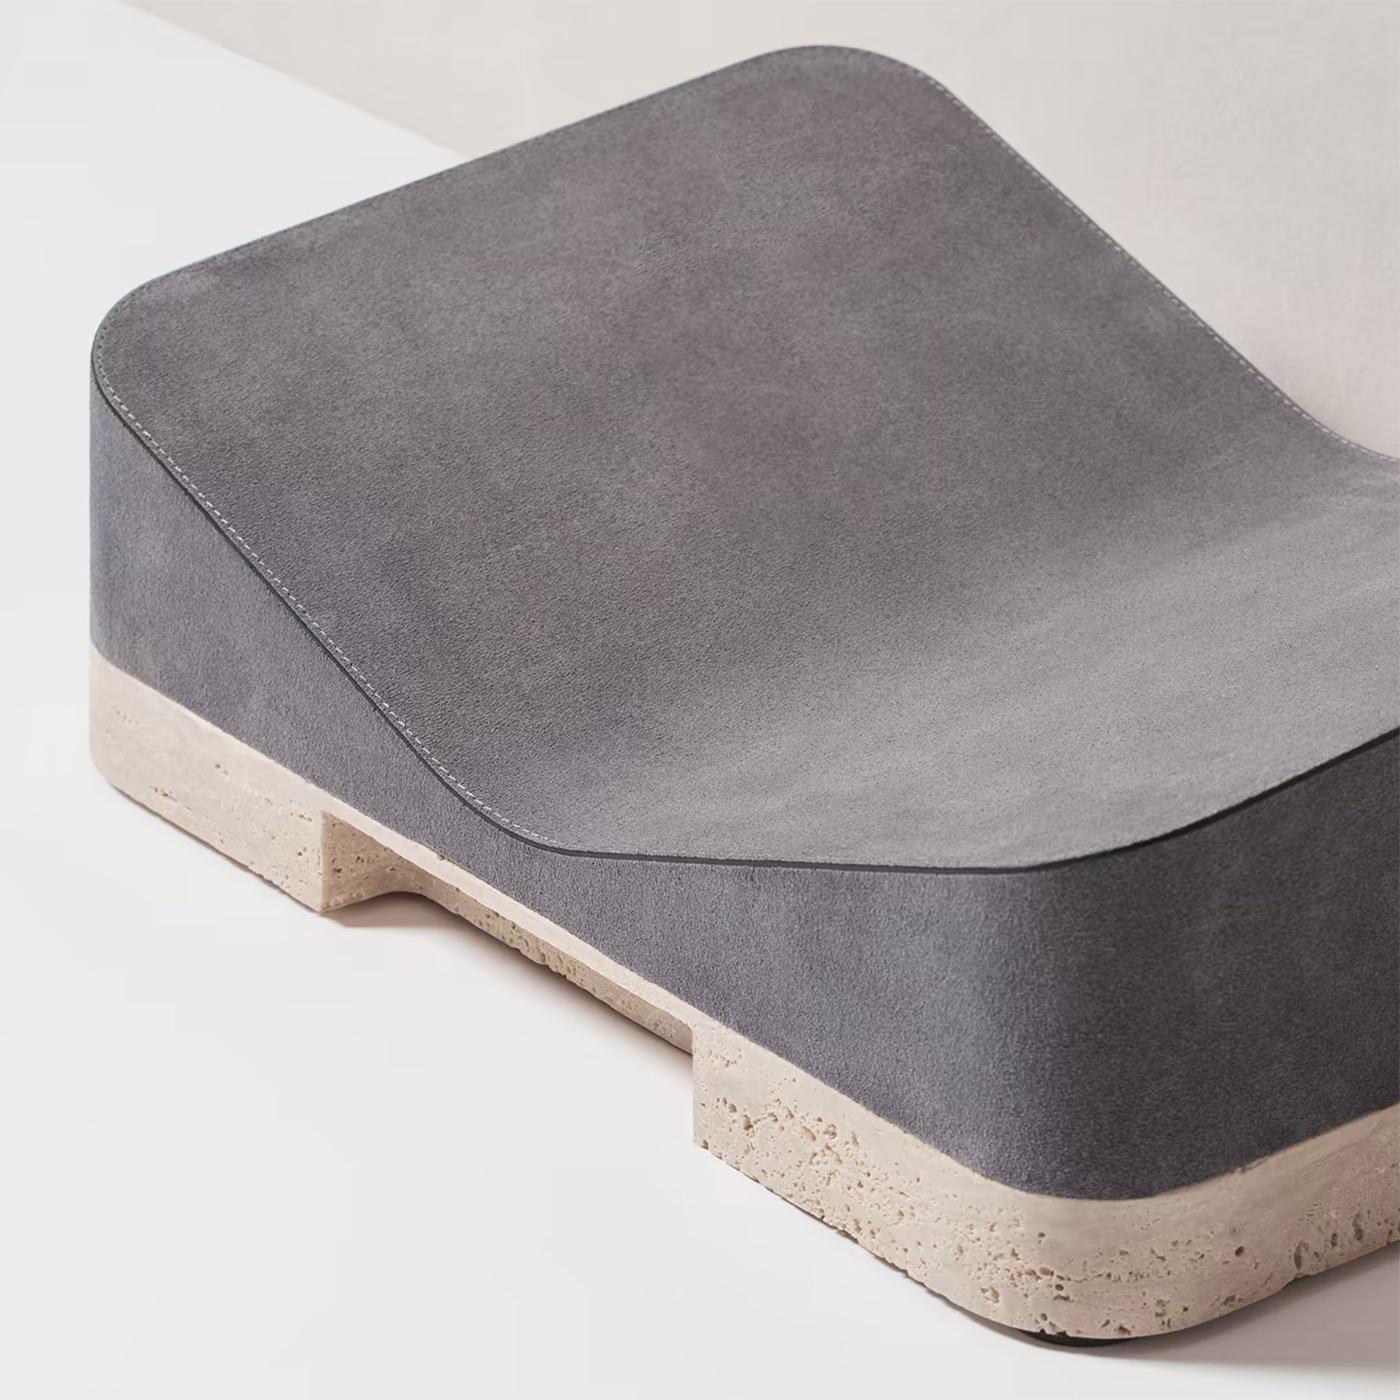 Bookrest Sweden Travertine with all structure
in travertine and with sweden leather covering
in blue color.
Also available with other with sweden leather 
covering colors, on request.